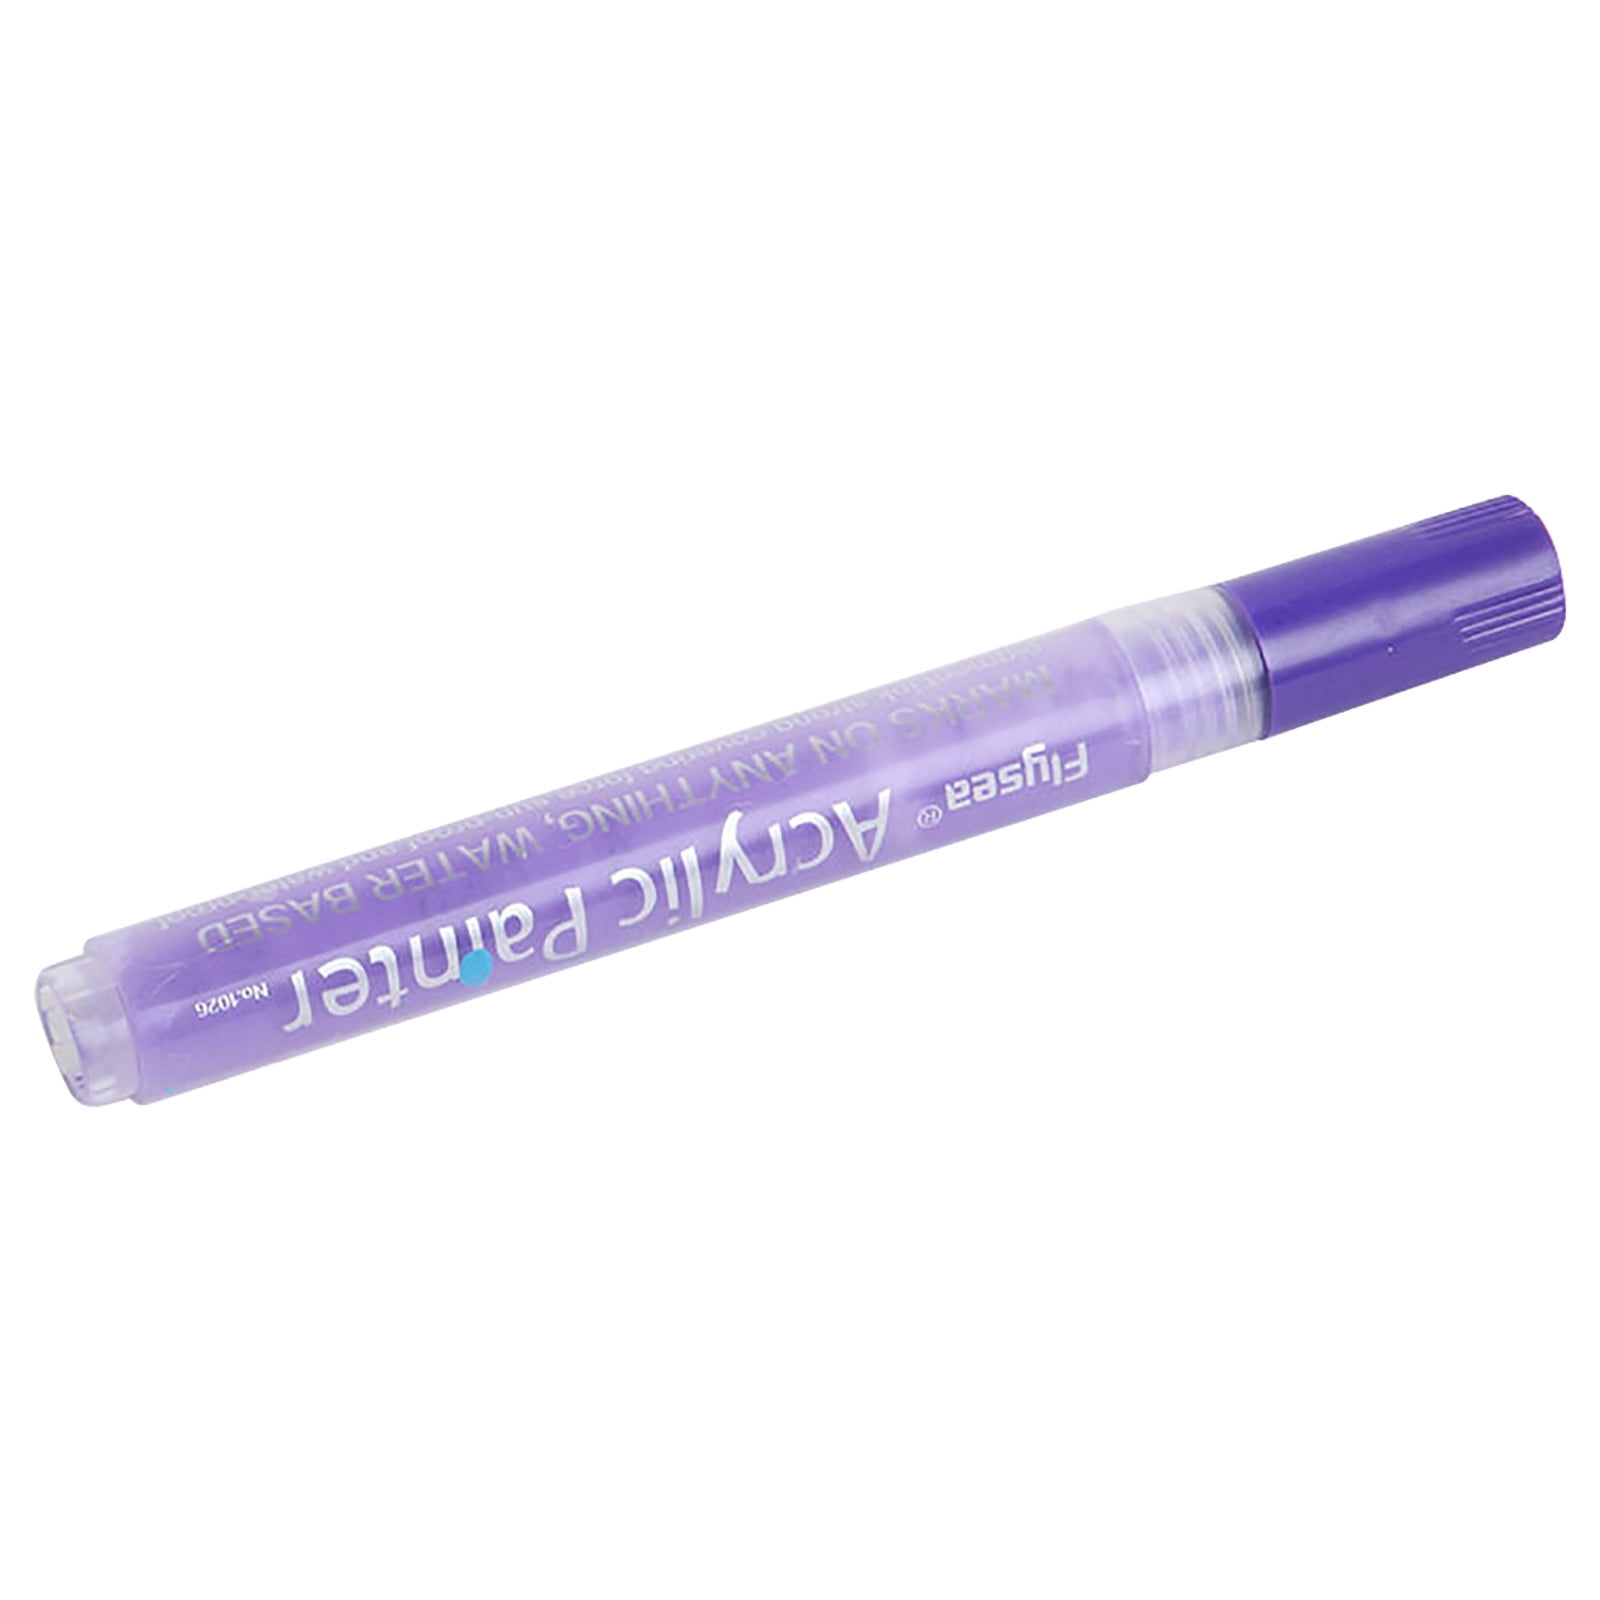 Premium Broad Tip Matte Water-Based Paint Pen by Craft Smart®